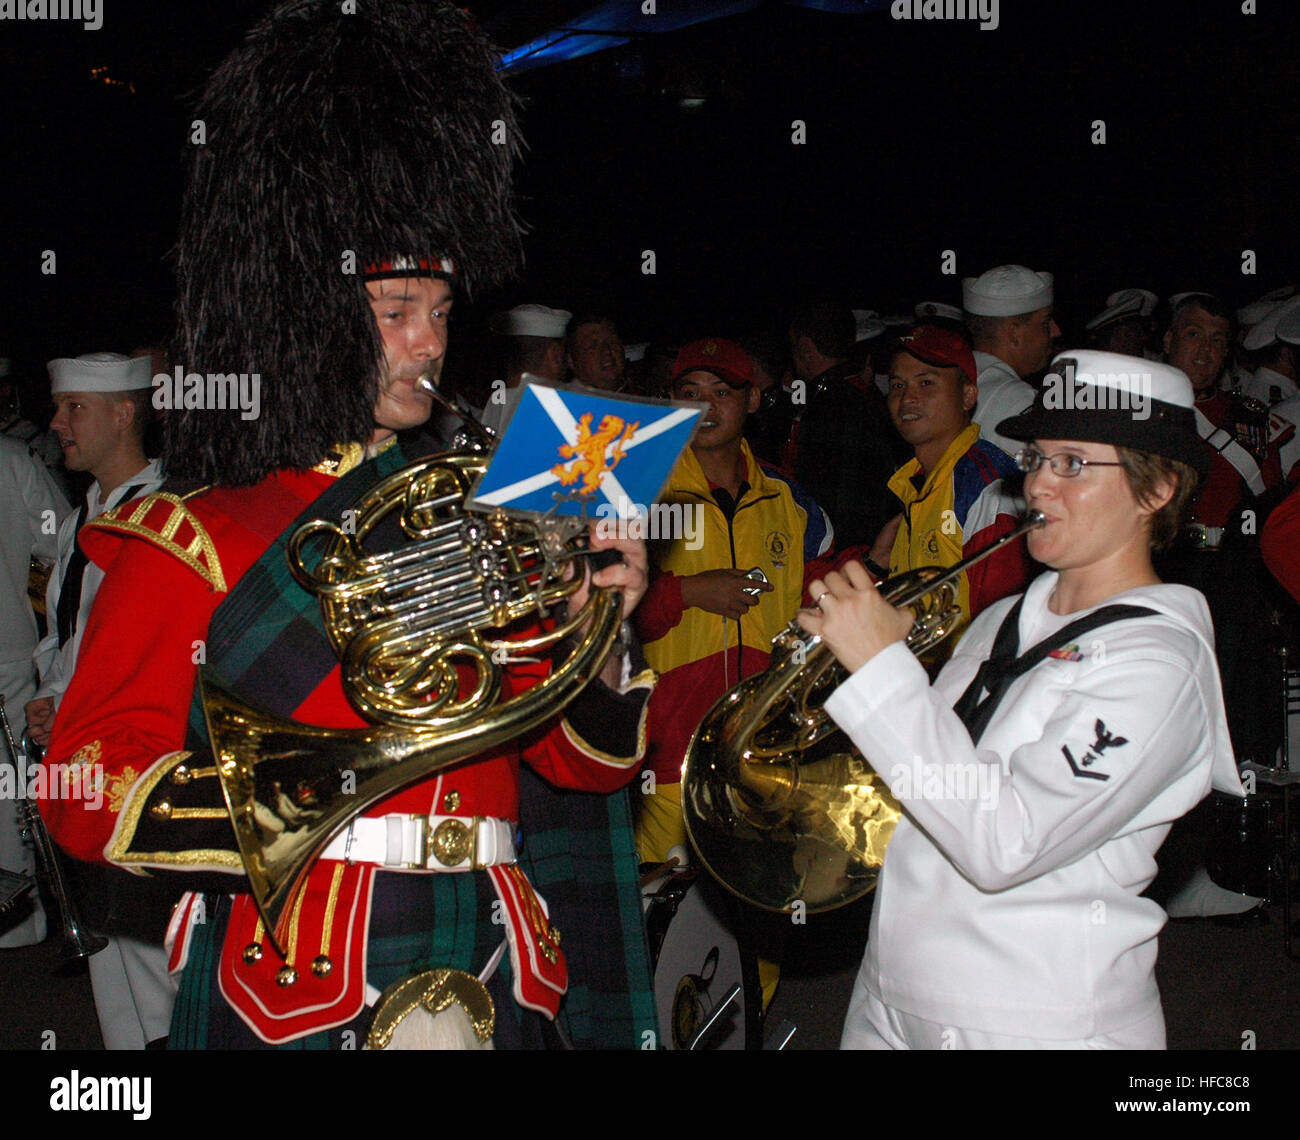 Petty Officer 3rd Class Helena Giammarco, musician in the Pacific Fleet band, plays the French horn backstage with a friend from the Royal Regiment of Scotland following the second night of performances at the Kuala Lumpur International Tattoo 2007. The Tattoo, scheduled for Sept. 6-8, celebrates the 50th anniversary of Malaysia's independence and features international military bands from the United States, Jordan, Brunei, France, India, the Republic of the Philippines, the Republic of Singapore, the Kingdom of Thailand, Korea, the Islamic Republic of Pakistan, the United Kingdom, and a Maori Stock Photo